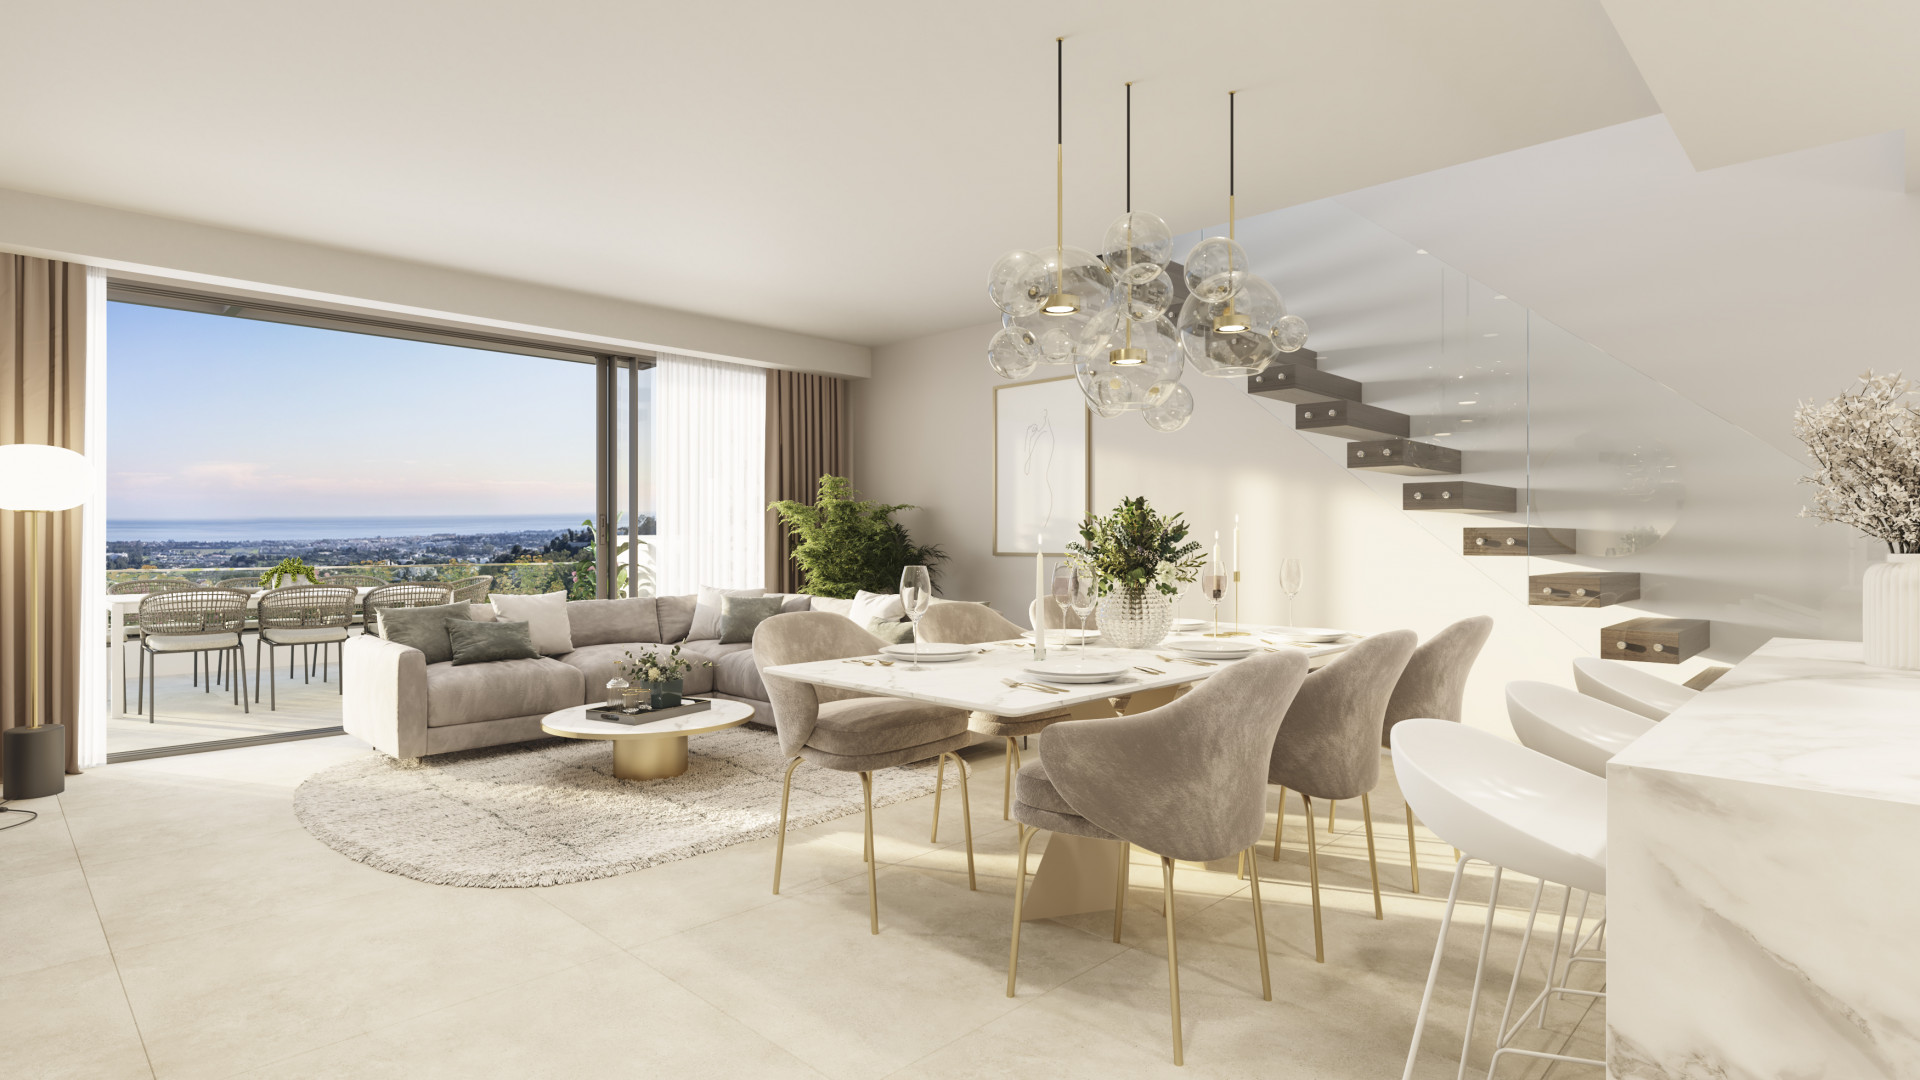 Tiara: Complex of 3 and 4 bedroom apartments with panoramic sea views over the Golf Valley | Image 14